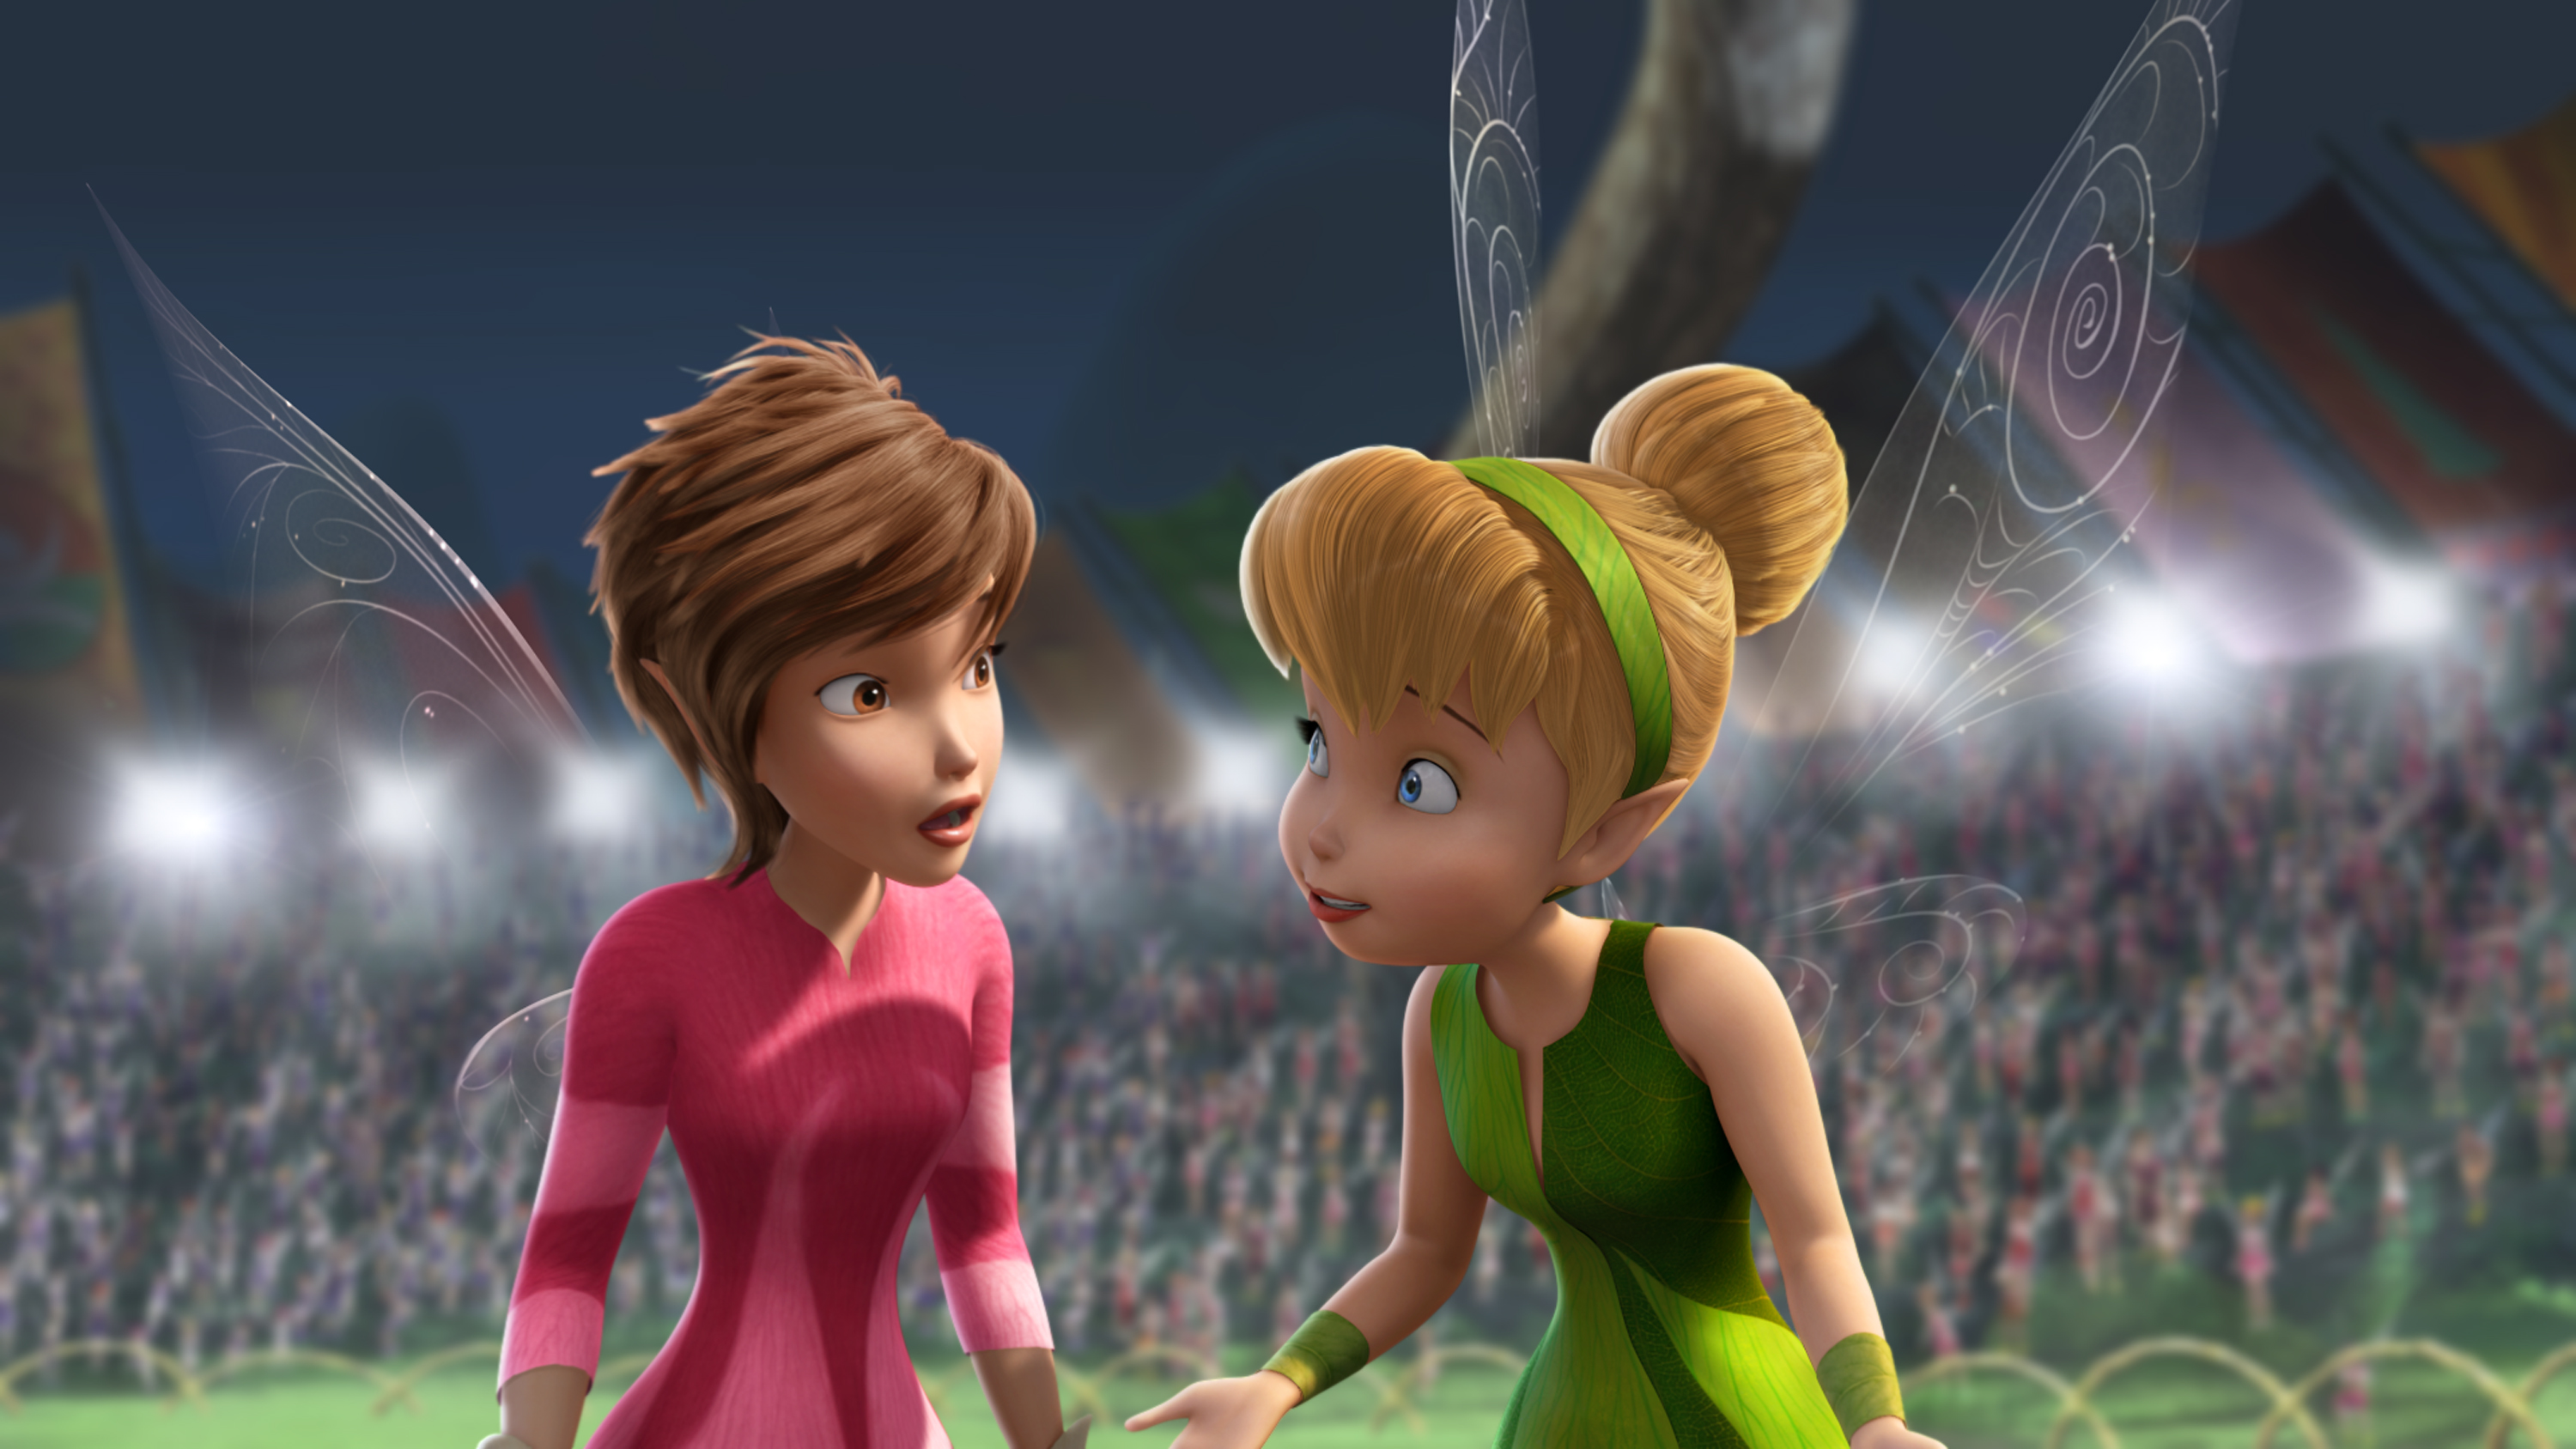 Pixie Hollow Games #8